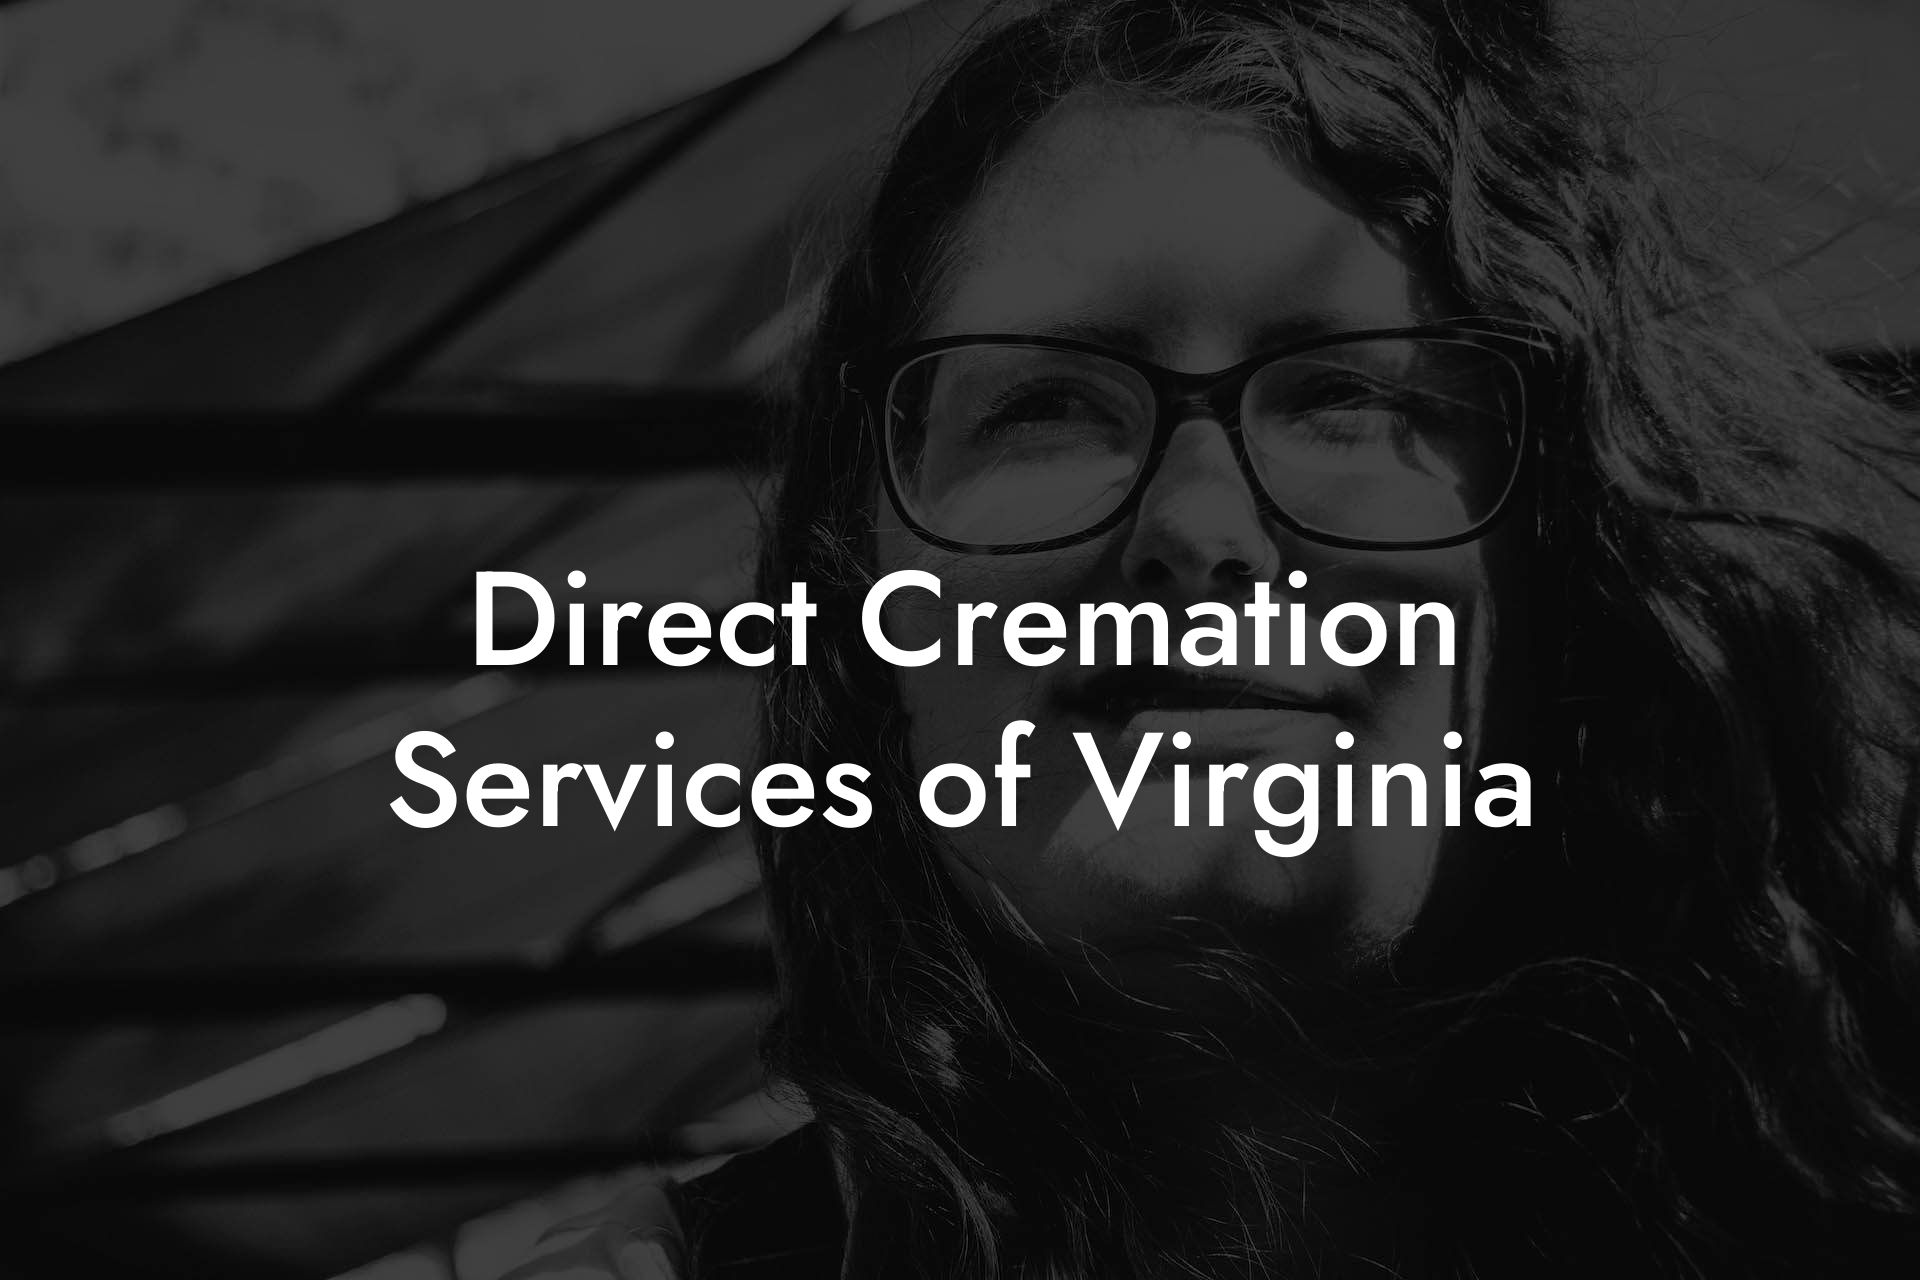 Direct Cremation Services of Virginia